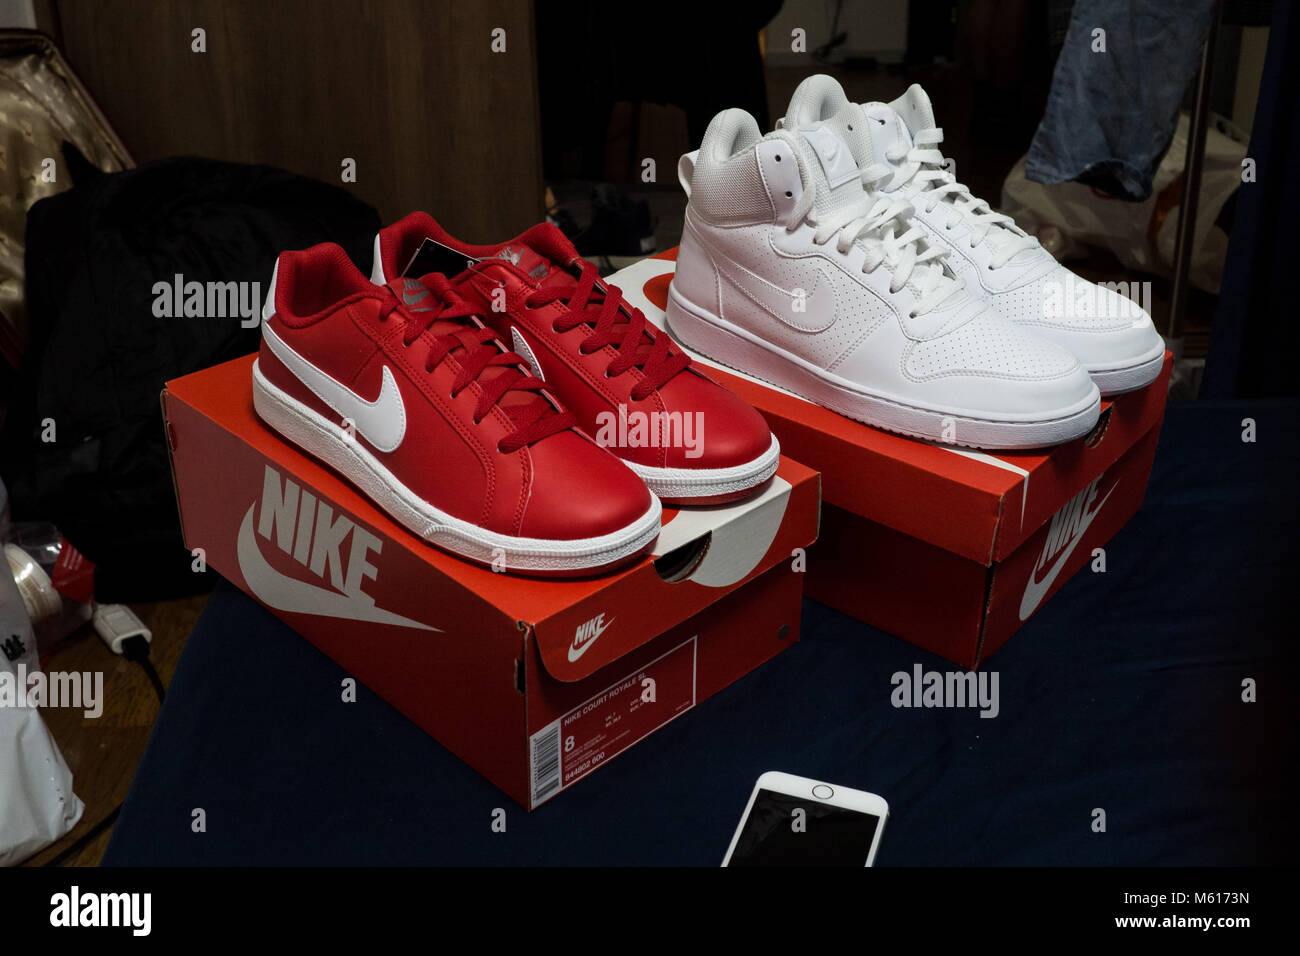 brand new shoes fresh out of the box. Red Nike Walkers, White Nike Tops Stock Photo - Alamy